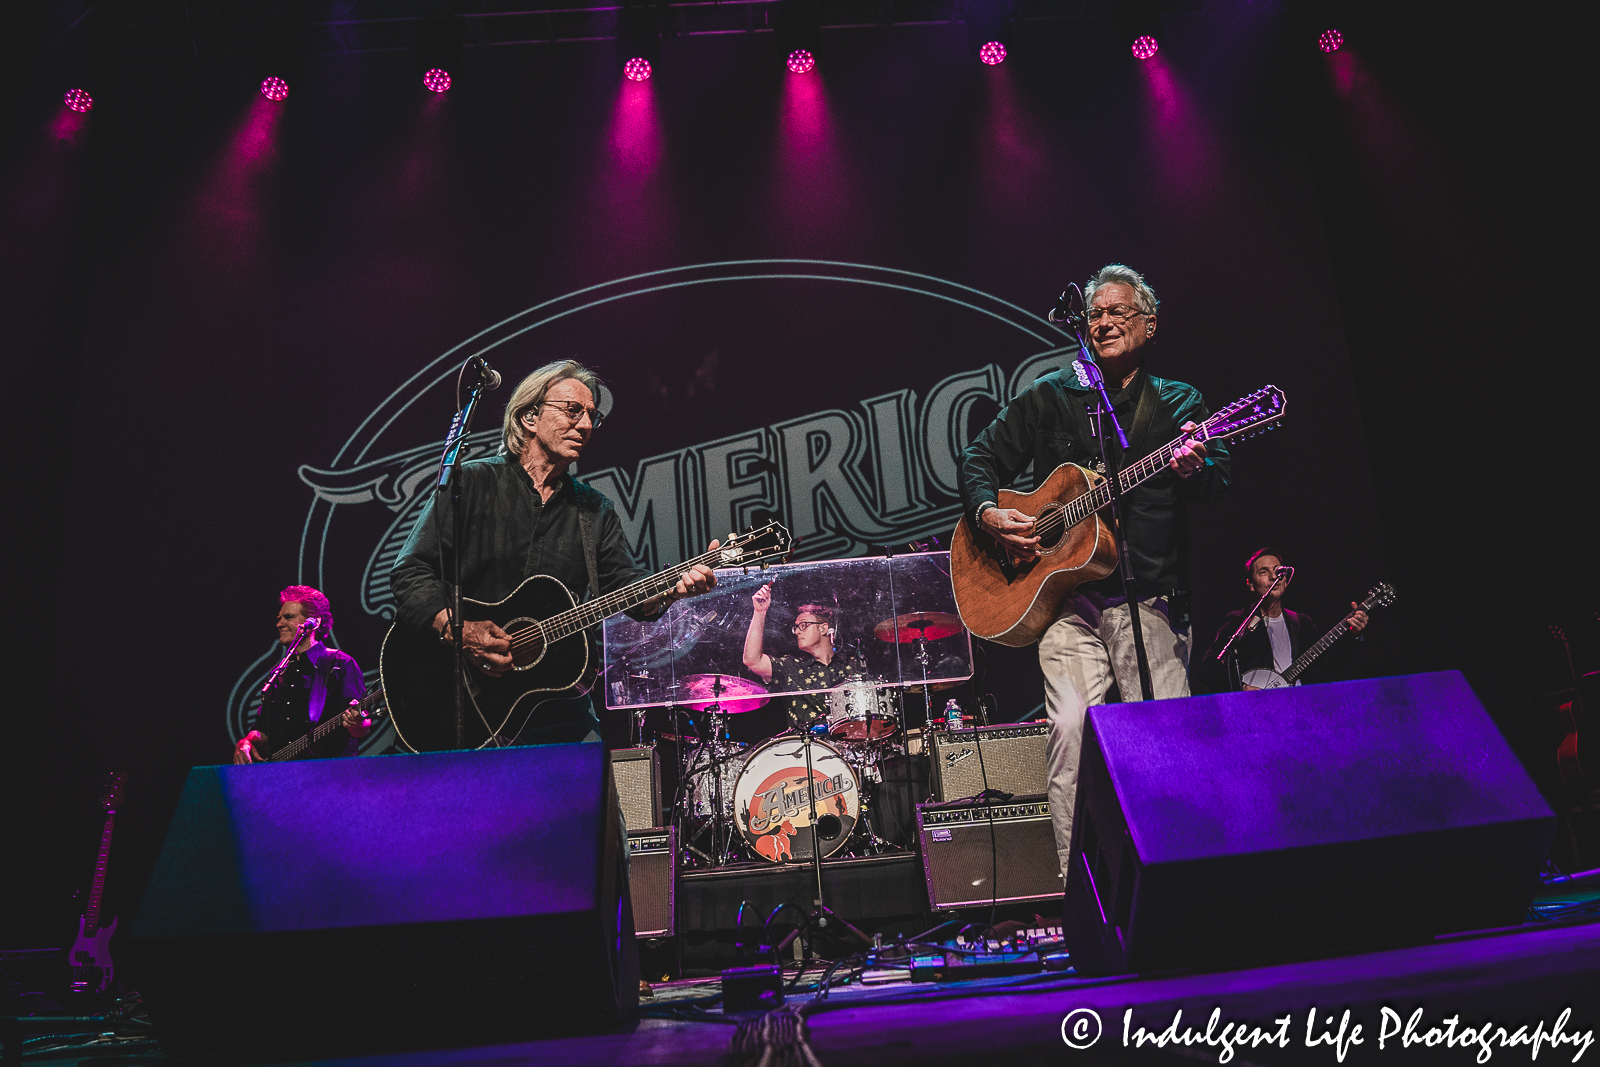 Live concert performance featuring folk rock group America at Star Pavilion inside of Ameristar Casino in Kansas City, MO on June 2, 2023.